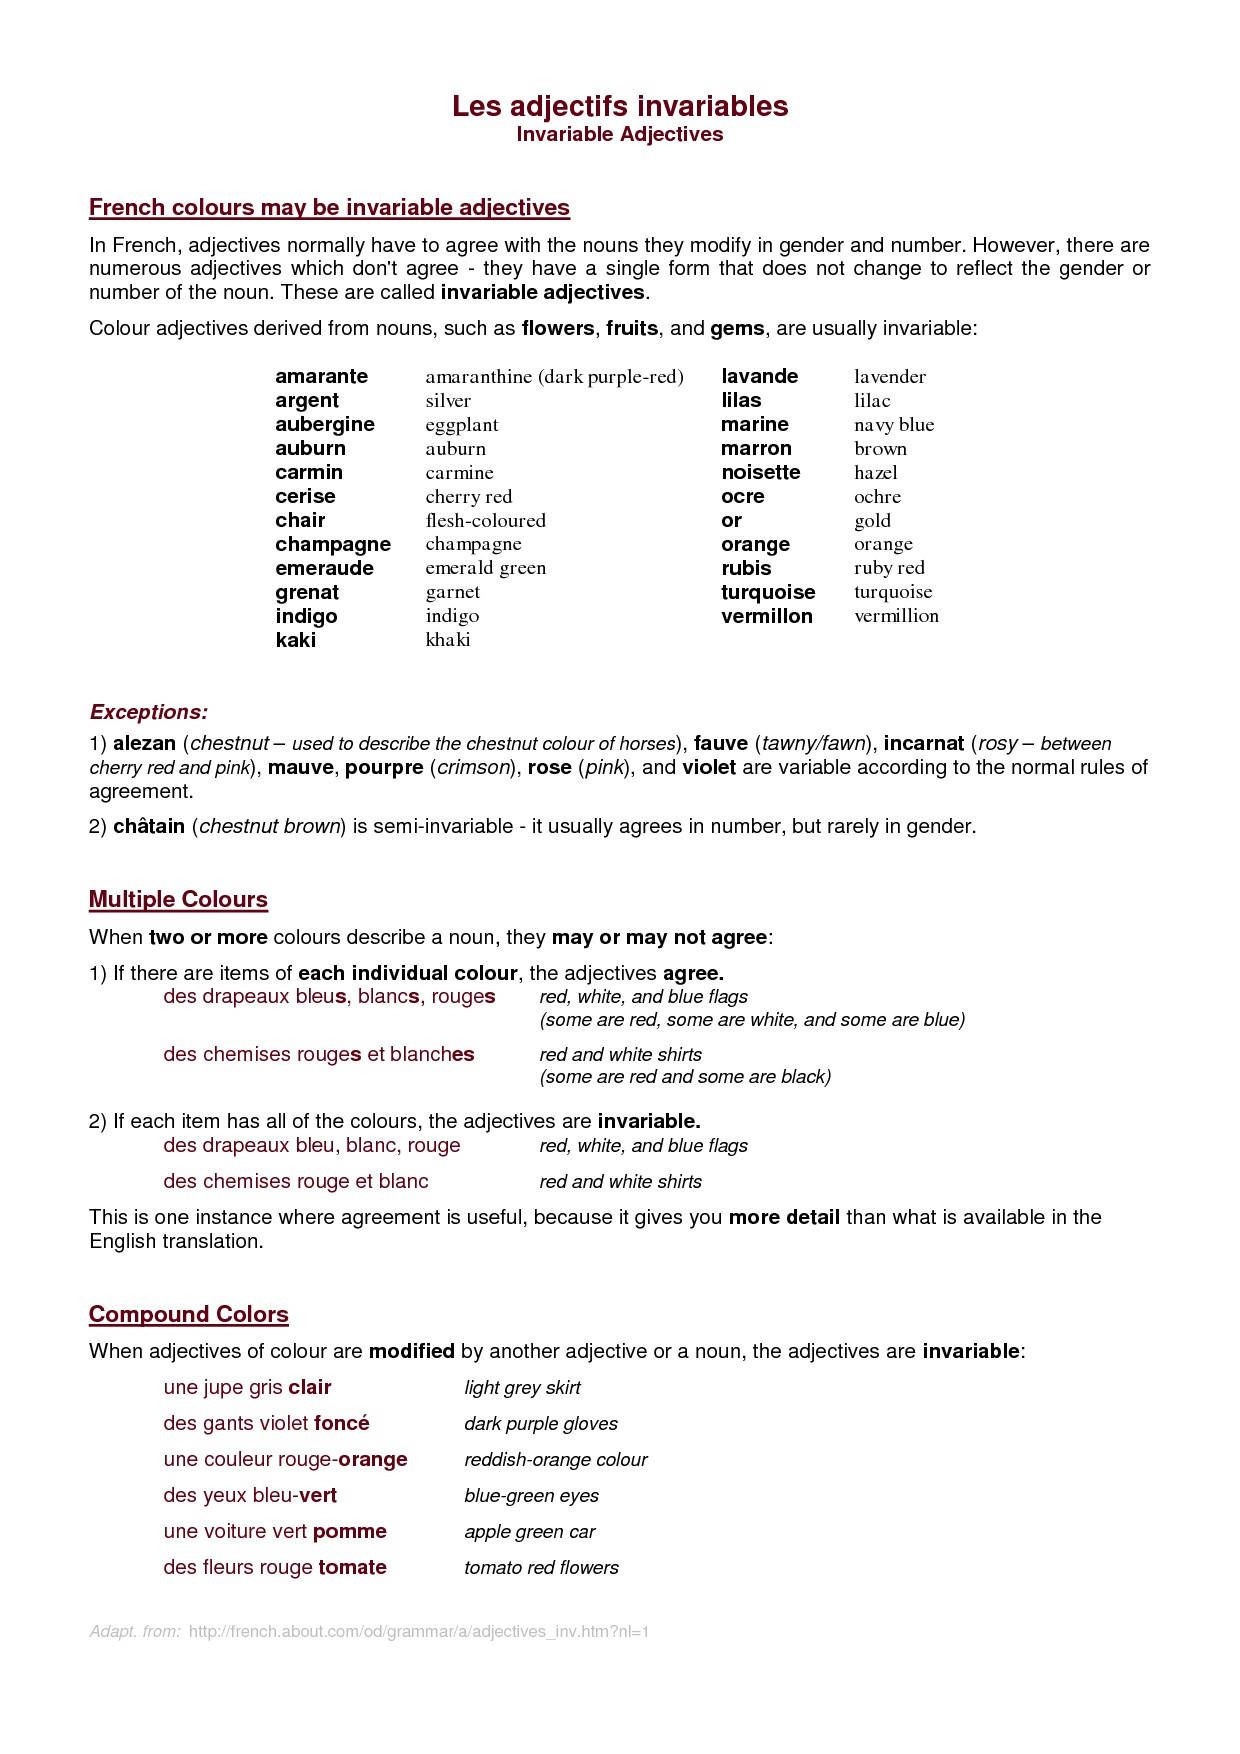 agreement-of-adjectives-spanish-worksheet-answers-db-excel